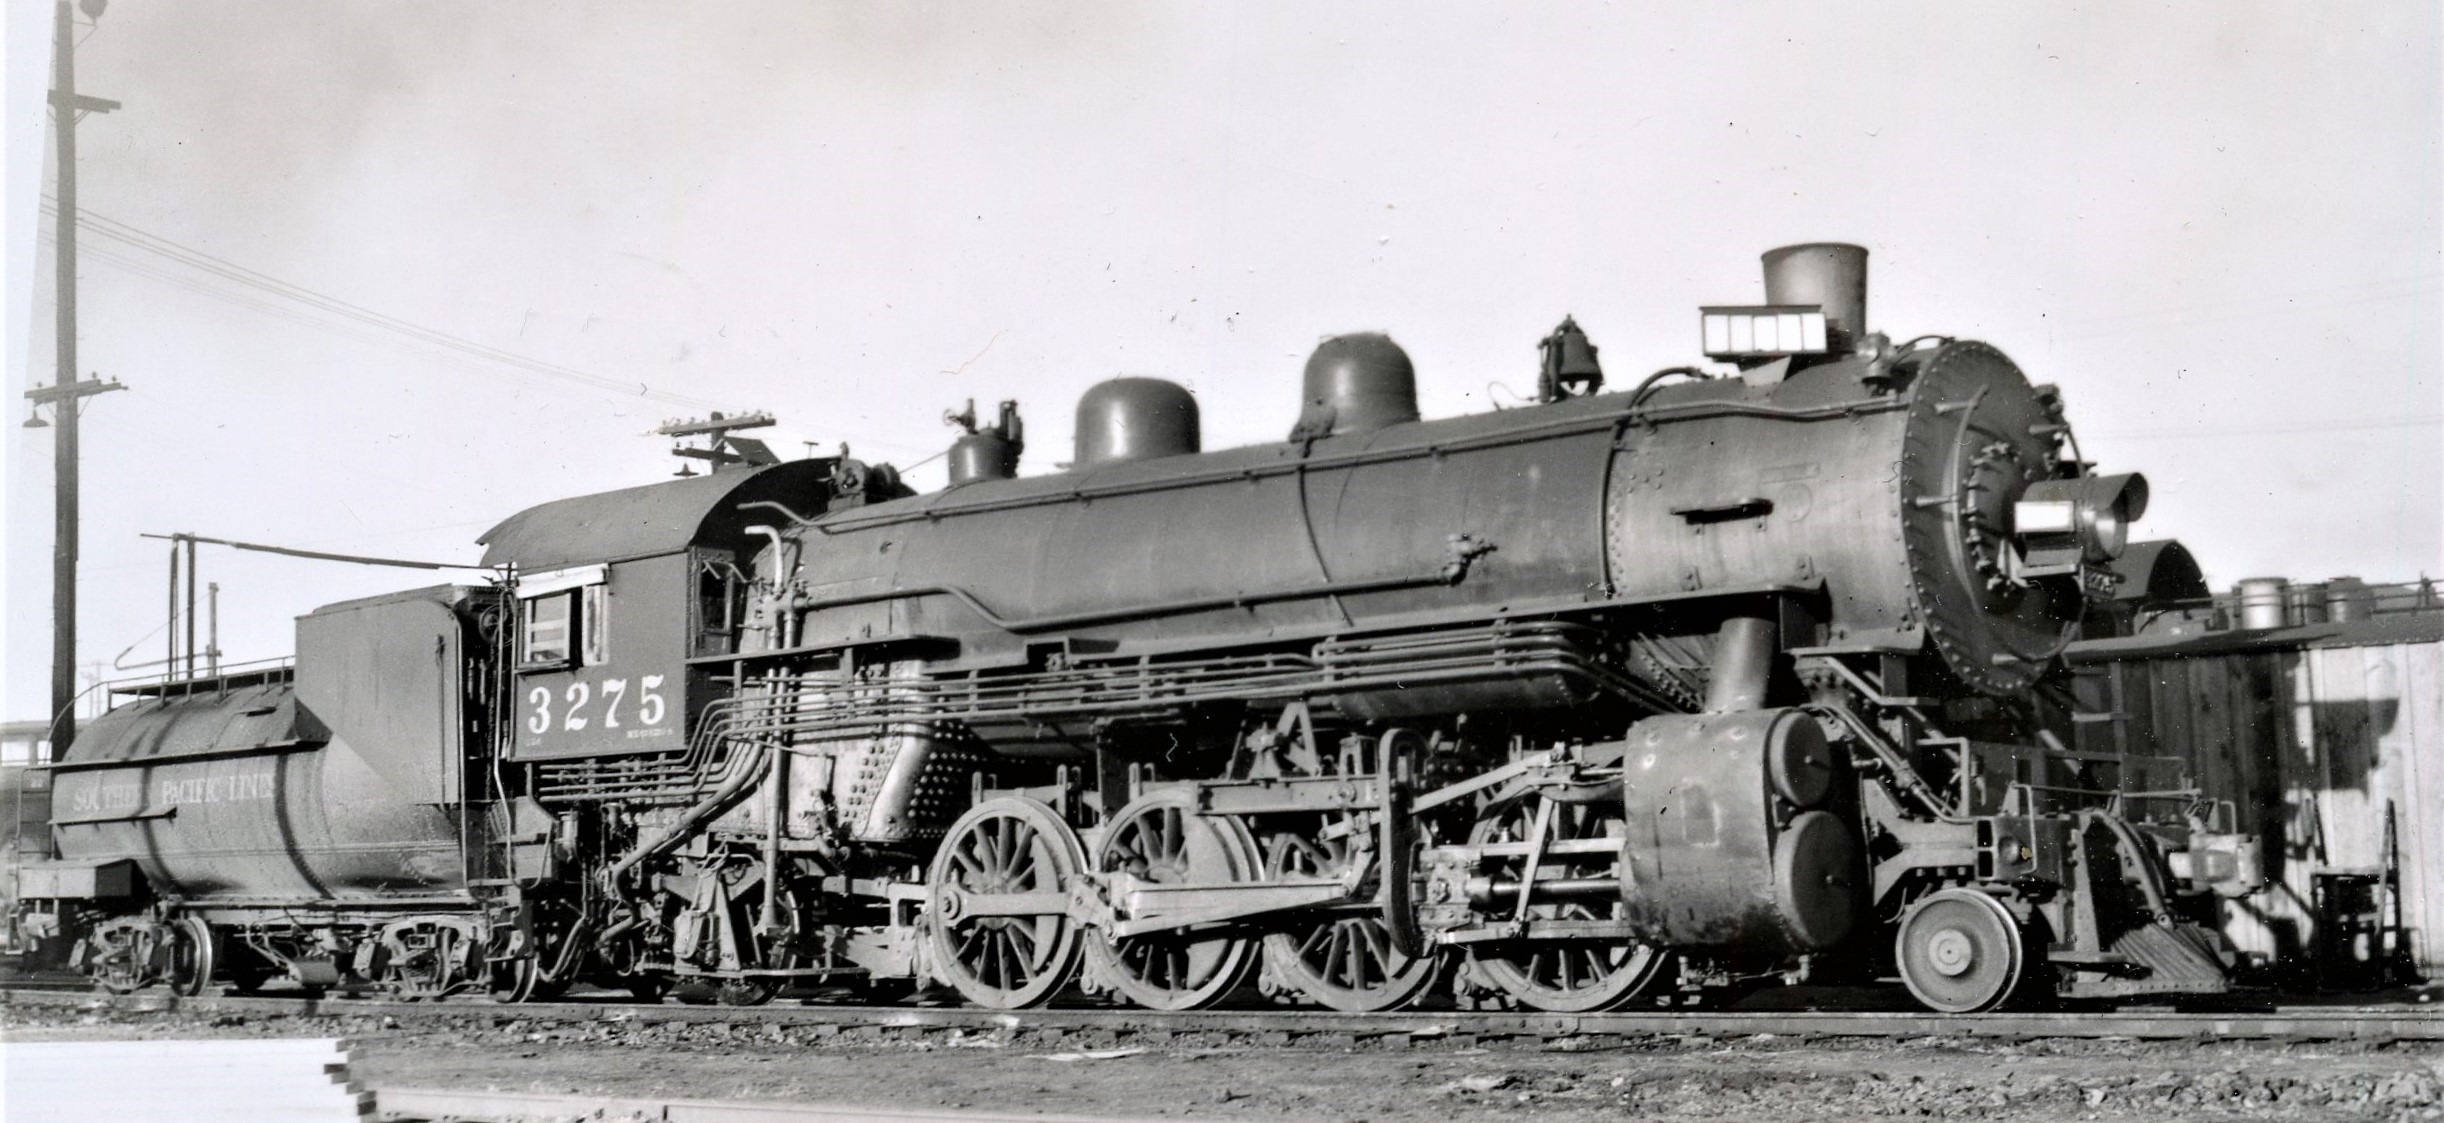 Southern Pacific Lines | Oakland, California | Class MK5 2-8-2 #3275 steam locomotive | November 17, 1939 | West Jersey Chapter NRHS Collectionr